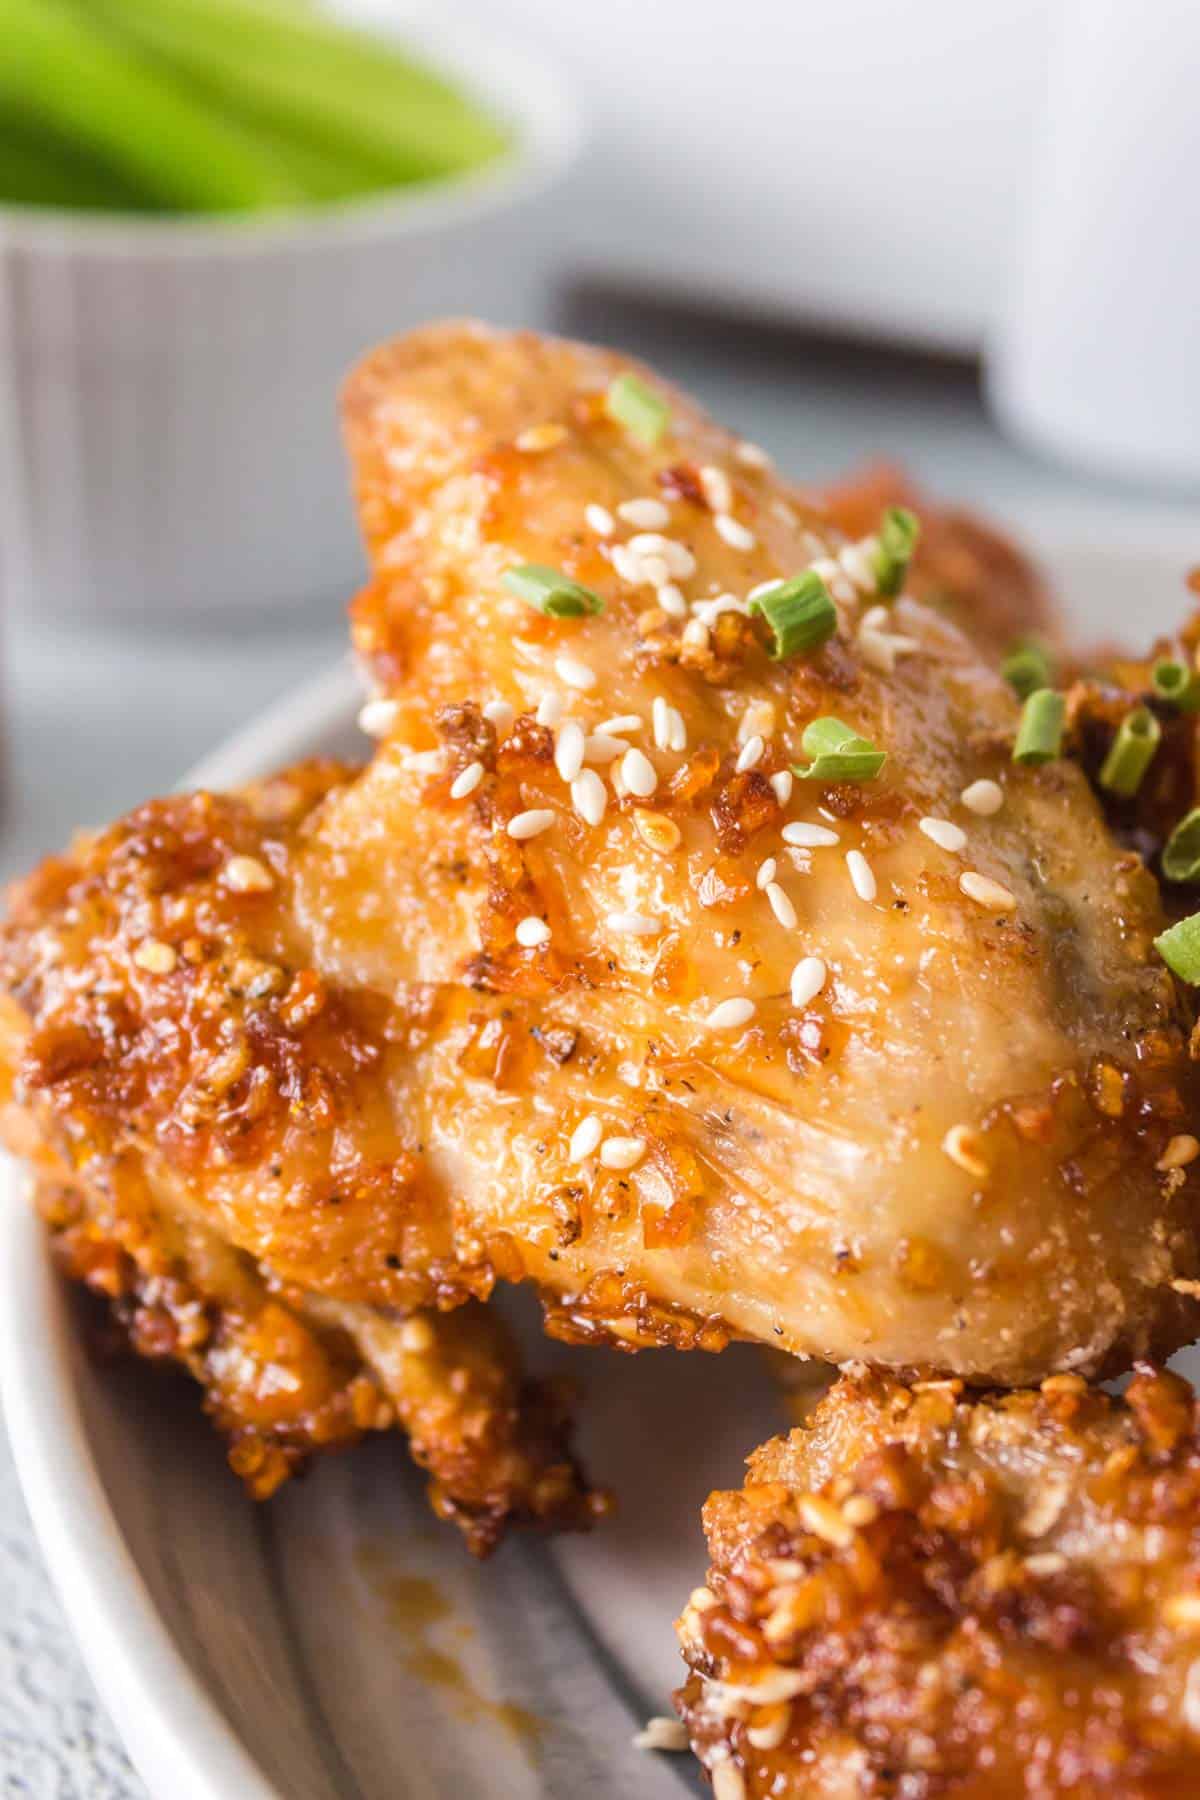 An upclose image of a gooey chicken wing coated with sesame seed garlic honey sauce.